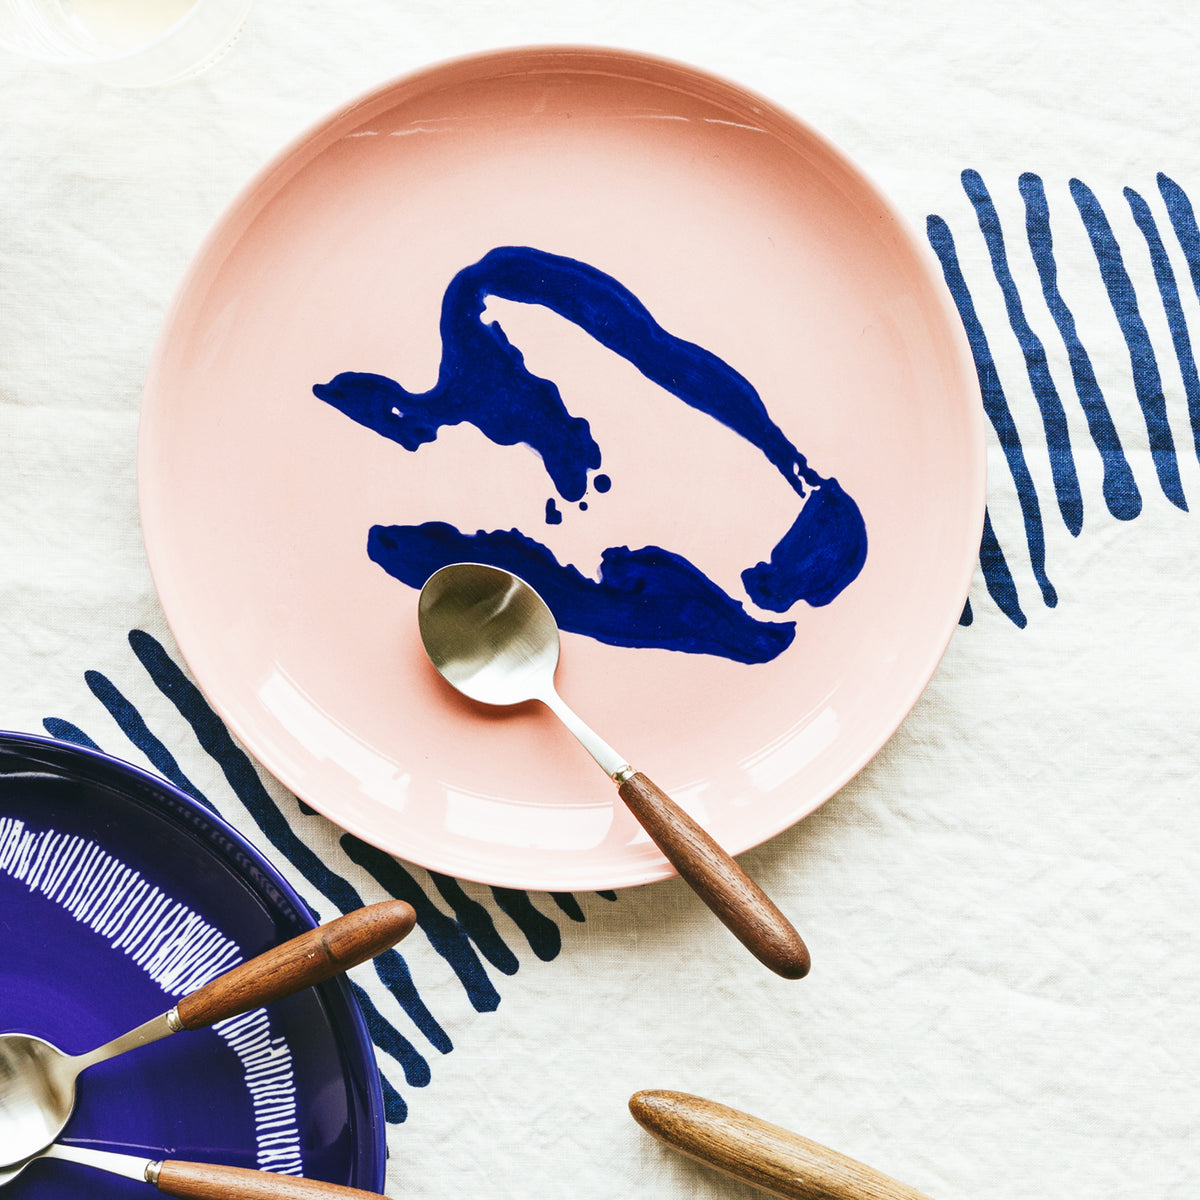 Delicious Pink Plate with Blue Pepper Motif - M